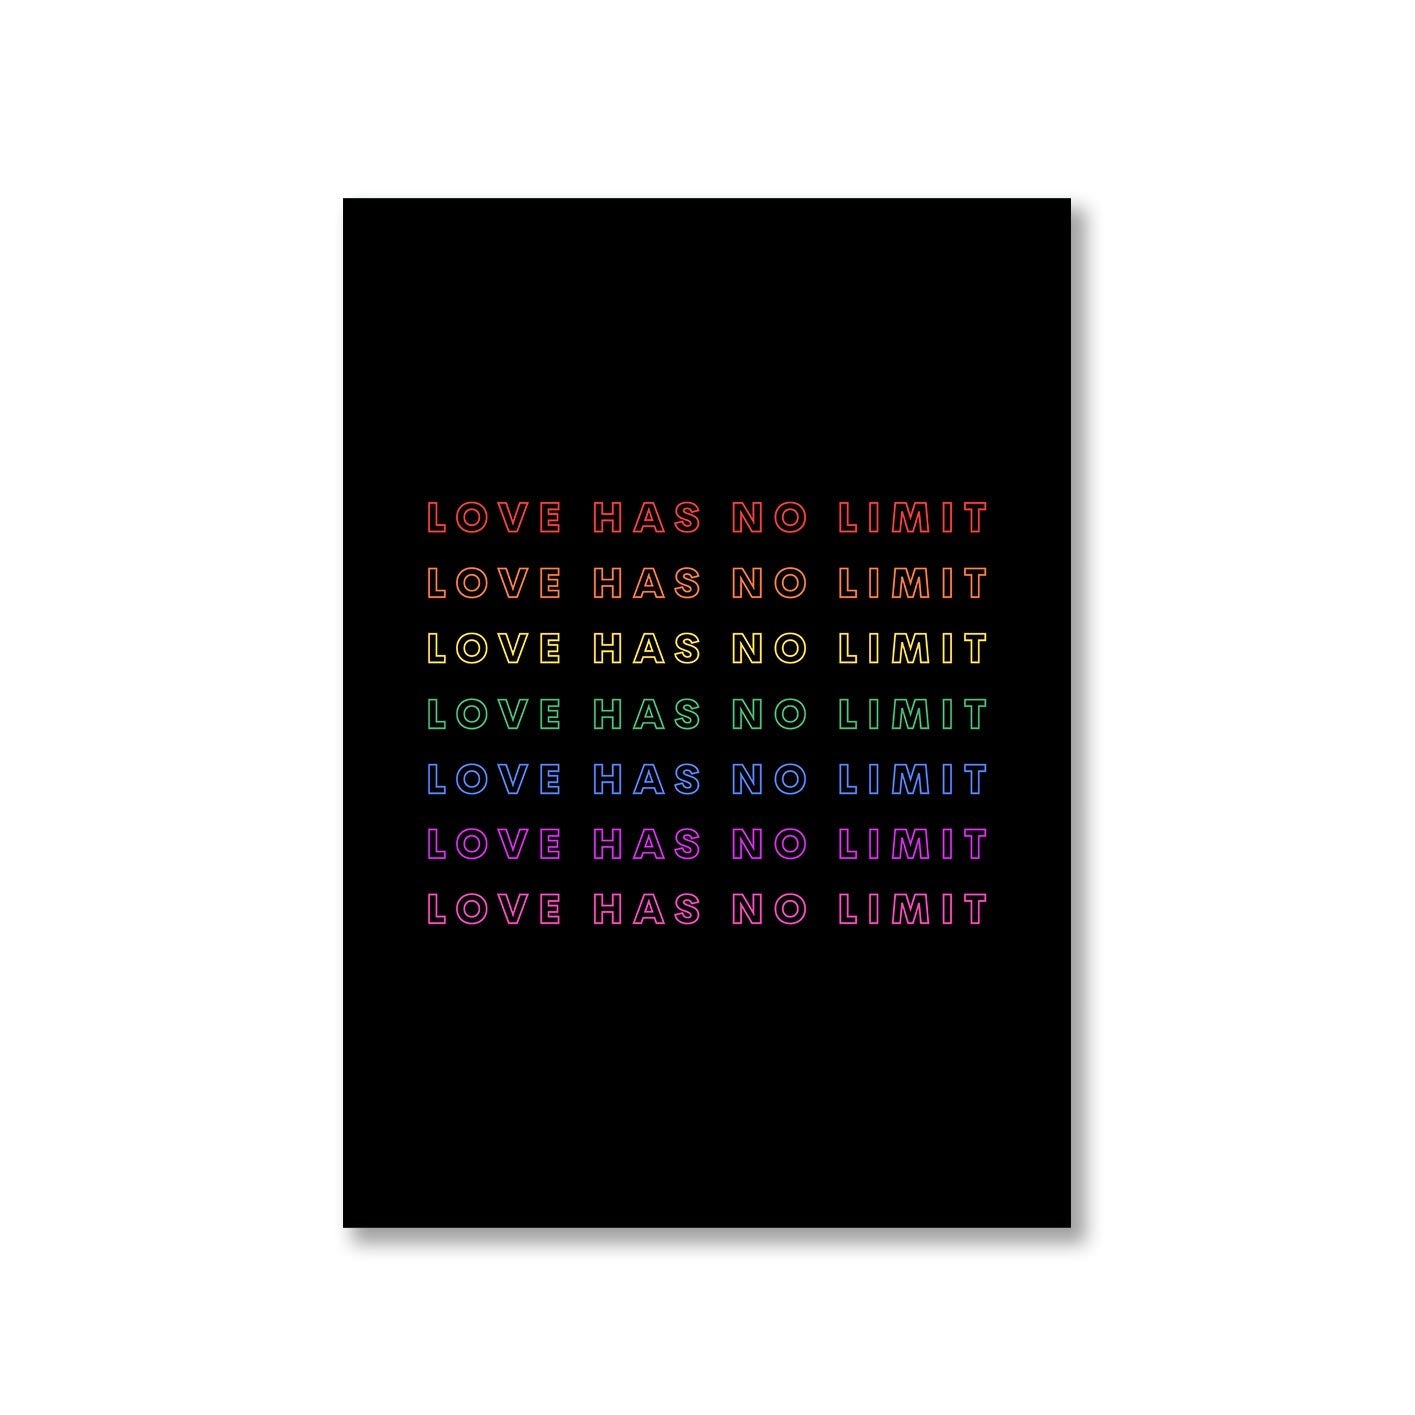 pride love has no limit poster wall art buy online india the banyan tee tbt a4 - lgbtqia+